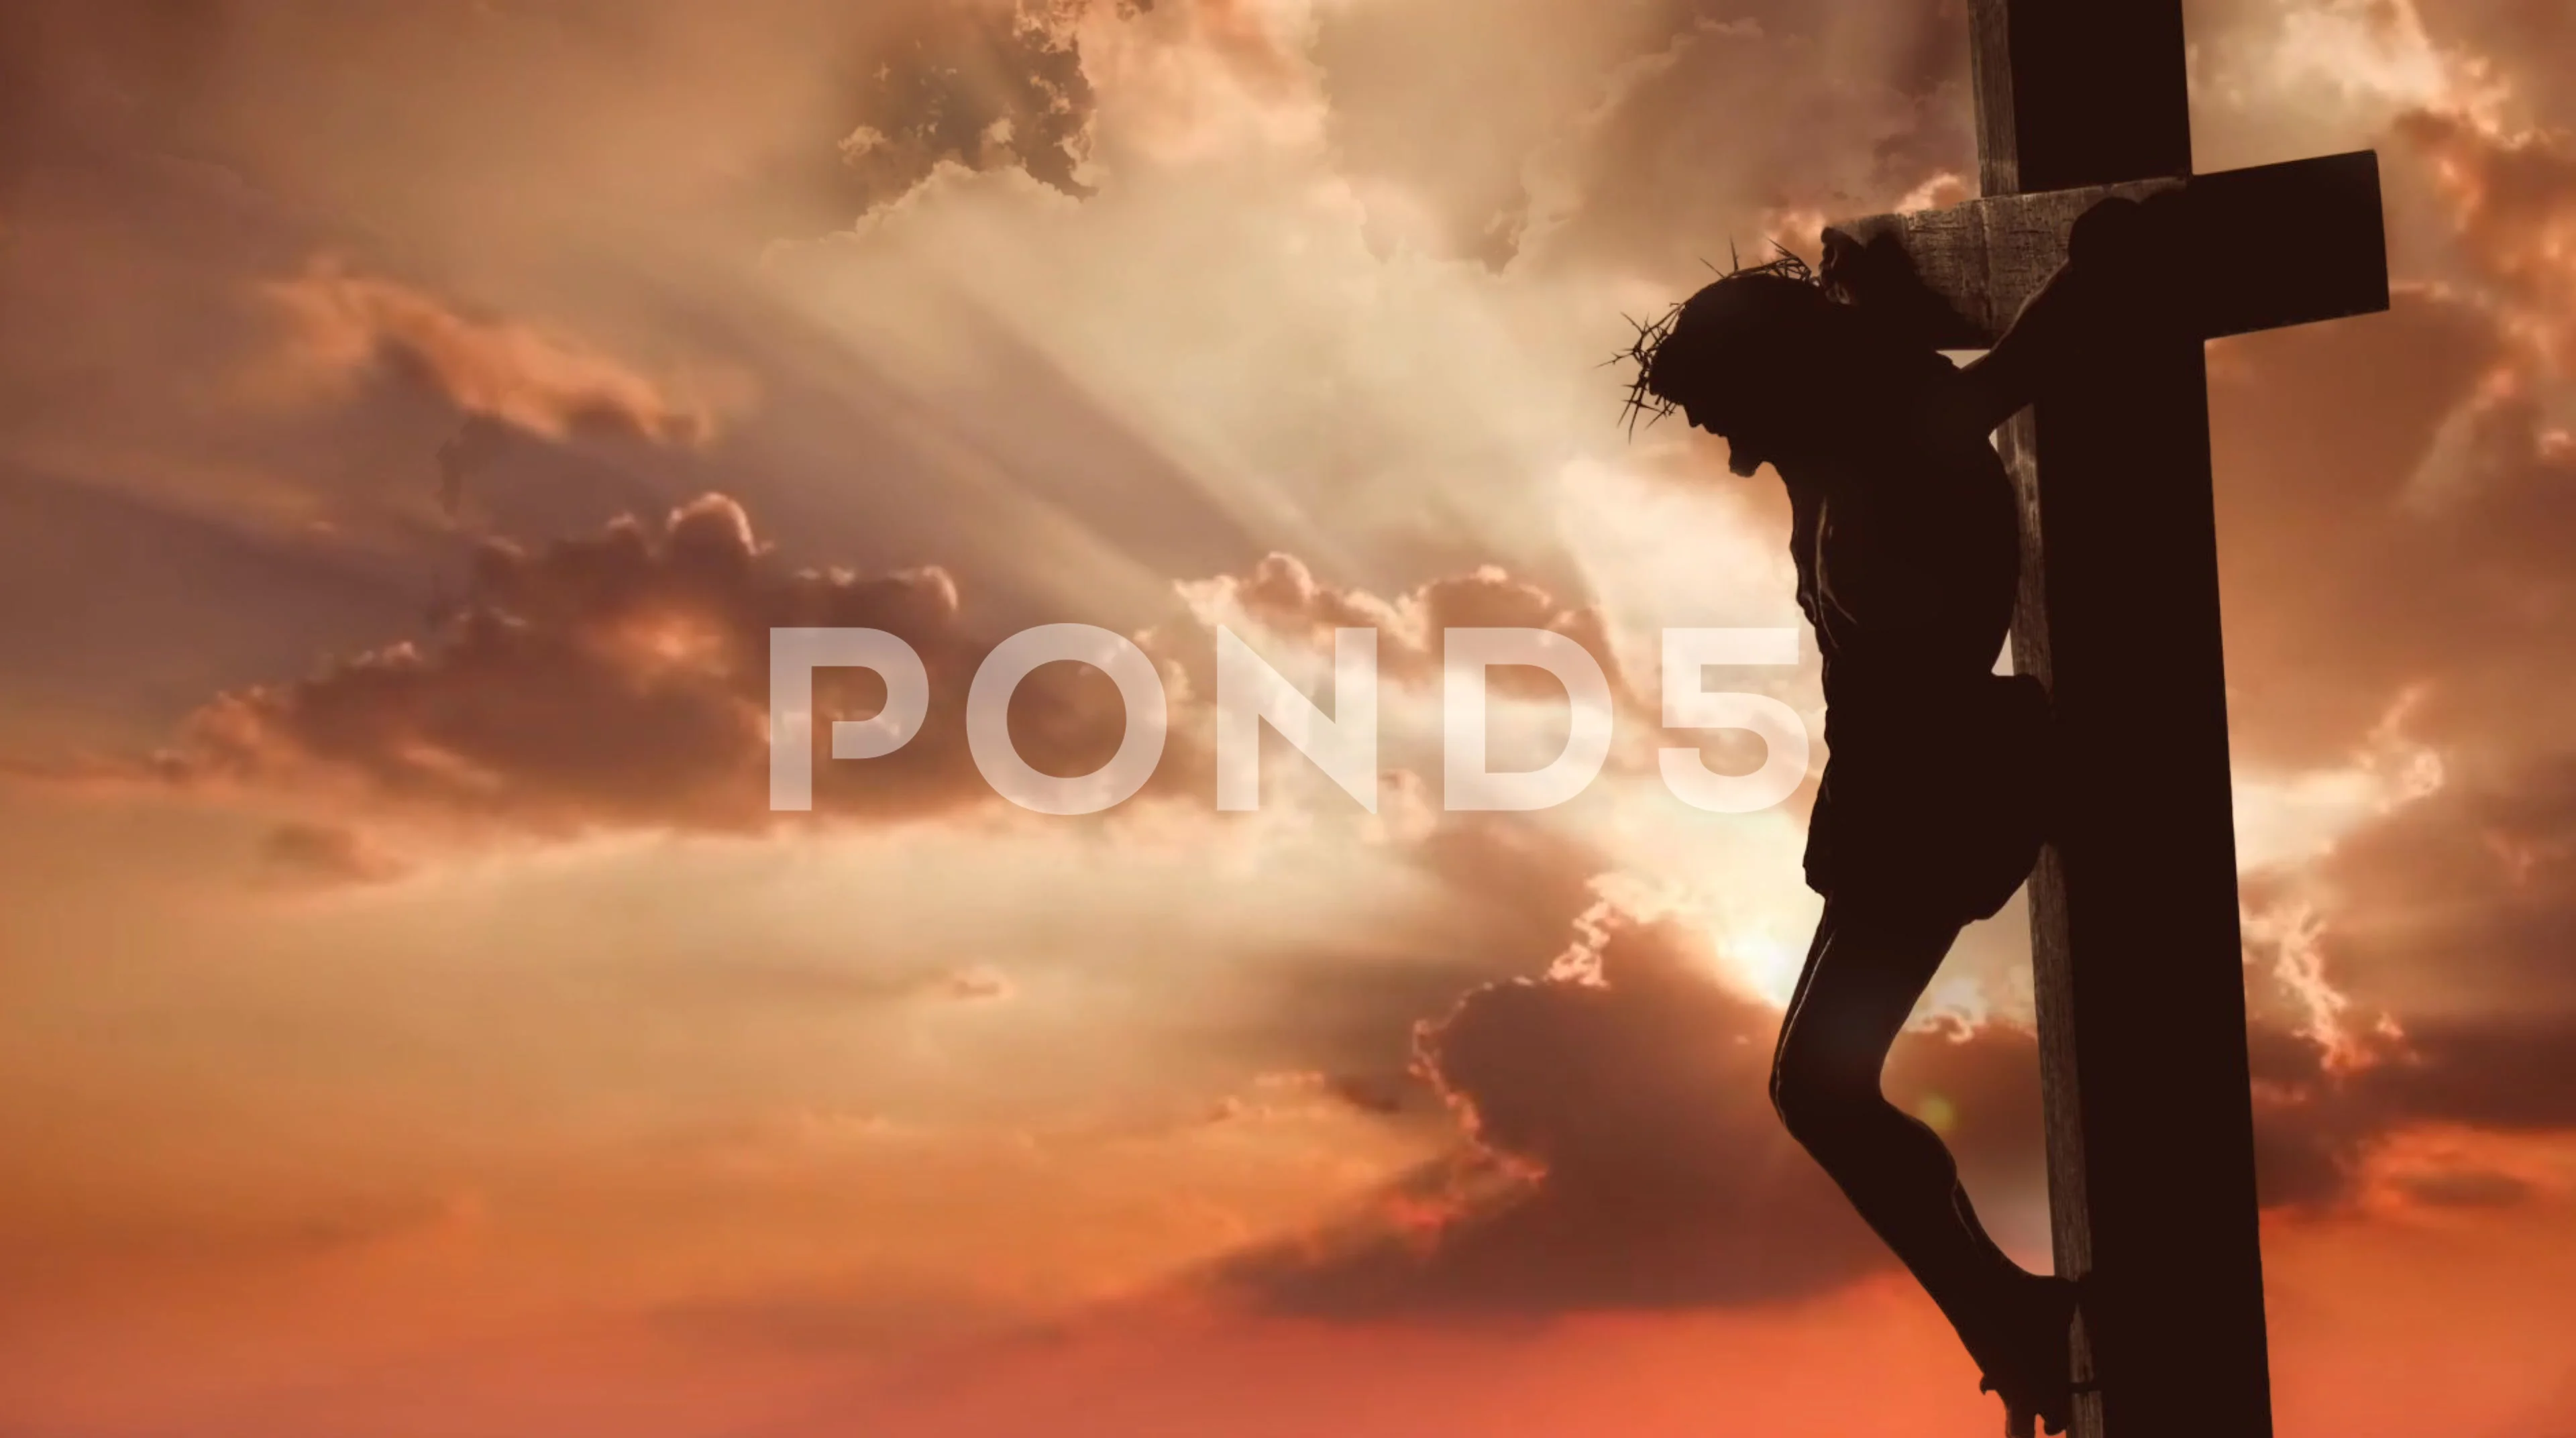 Jesus hanging on the cross at sunset dyi... | Stock Video | Pond5